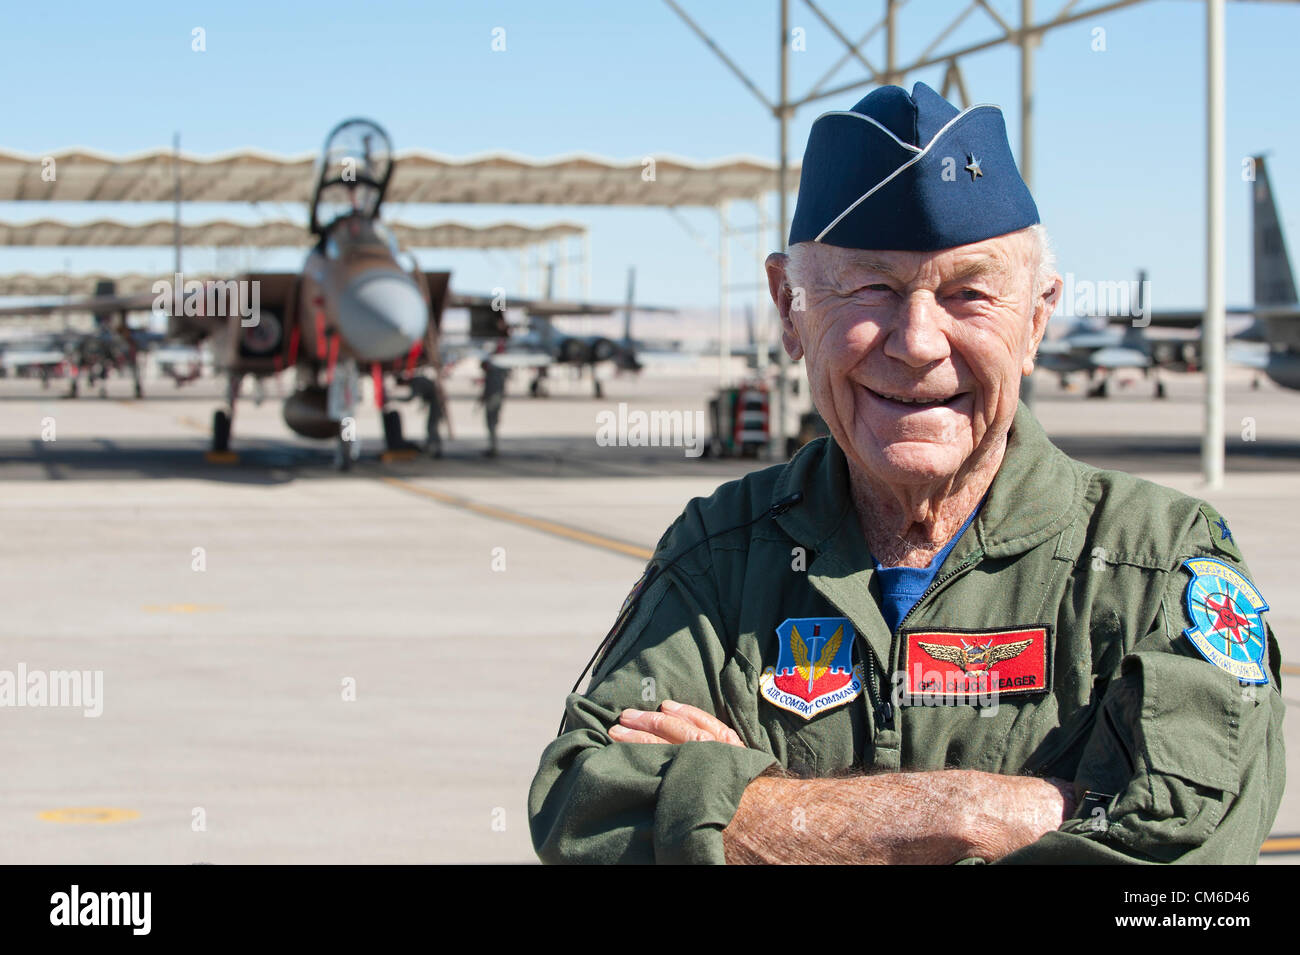 Retired United States Air Force Brig. Gen. Chuck Yeager, 89, smiles after a flight in a F-15D Eagle fighter aircraft to celebrate the 65th anniversary of becoming the first person to break the sound barrier October 14, 2012, at Nellis Air Force Base, Nevada. In 1947 Yeager broke the sound barrier in a Bell XS-1 rocket research plane named Glamorous Glennis. Stock Photo